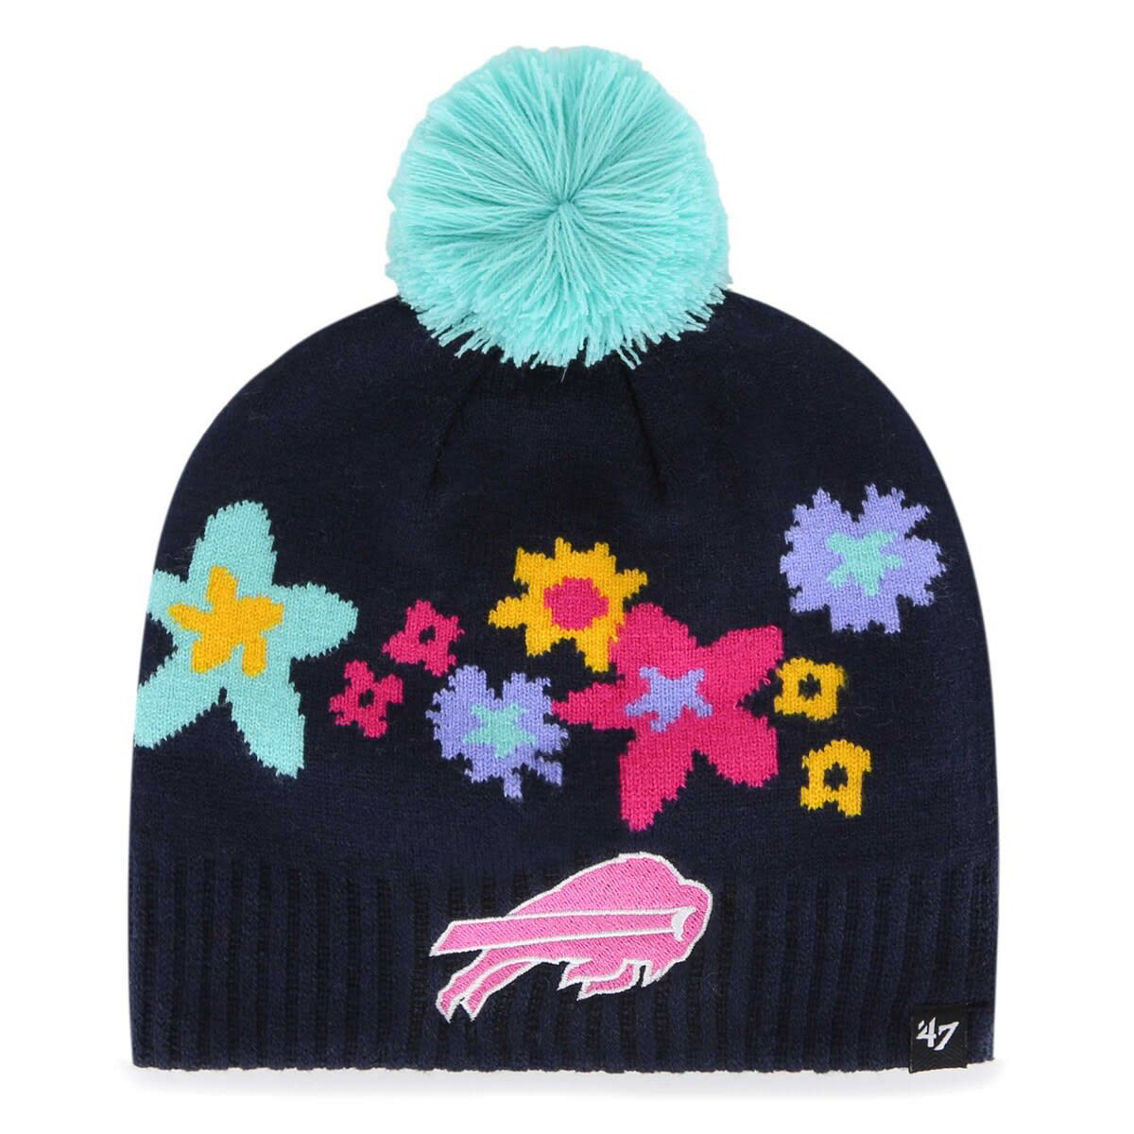 '47 Girls Youth Navy Buffalo Bills Buttercup Knit Beanie with Pom - Image 2 of 3